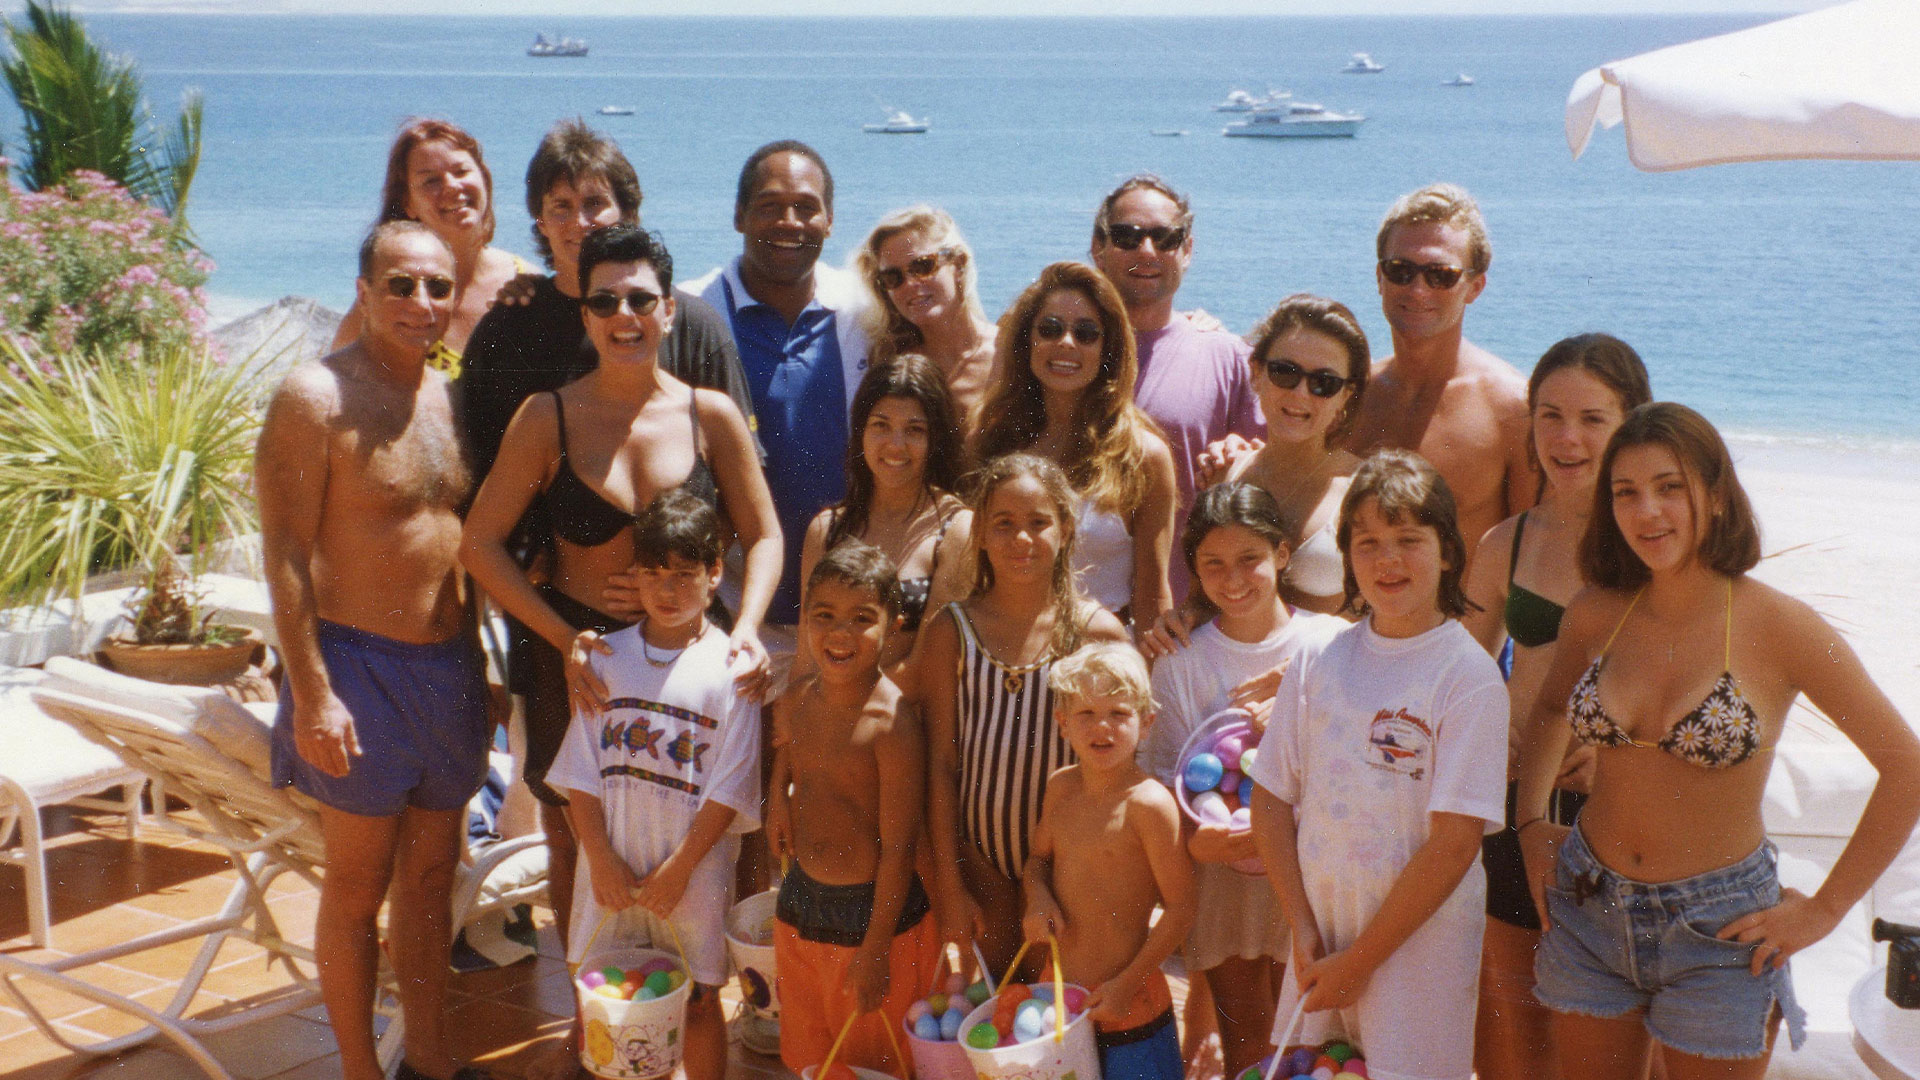 Shocking Throwback: OJ Simpson & Nicole Brown in Vacation Photo with Kardashians as Caitlyn Jenner Speaks Out